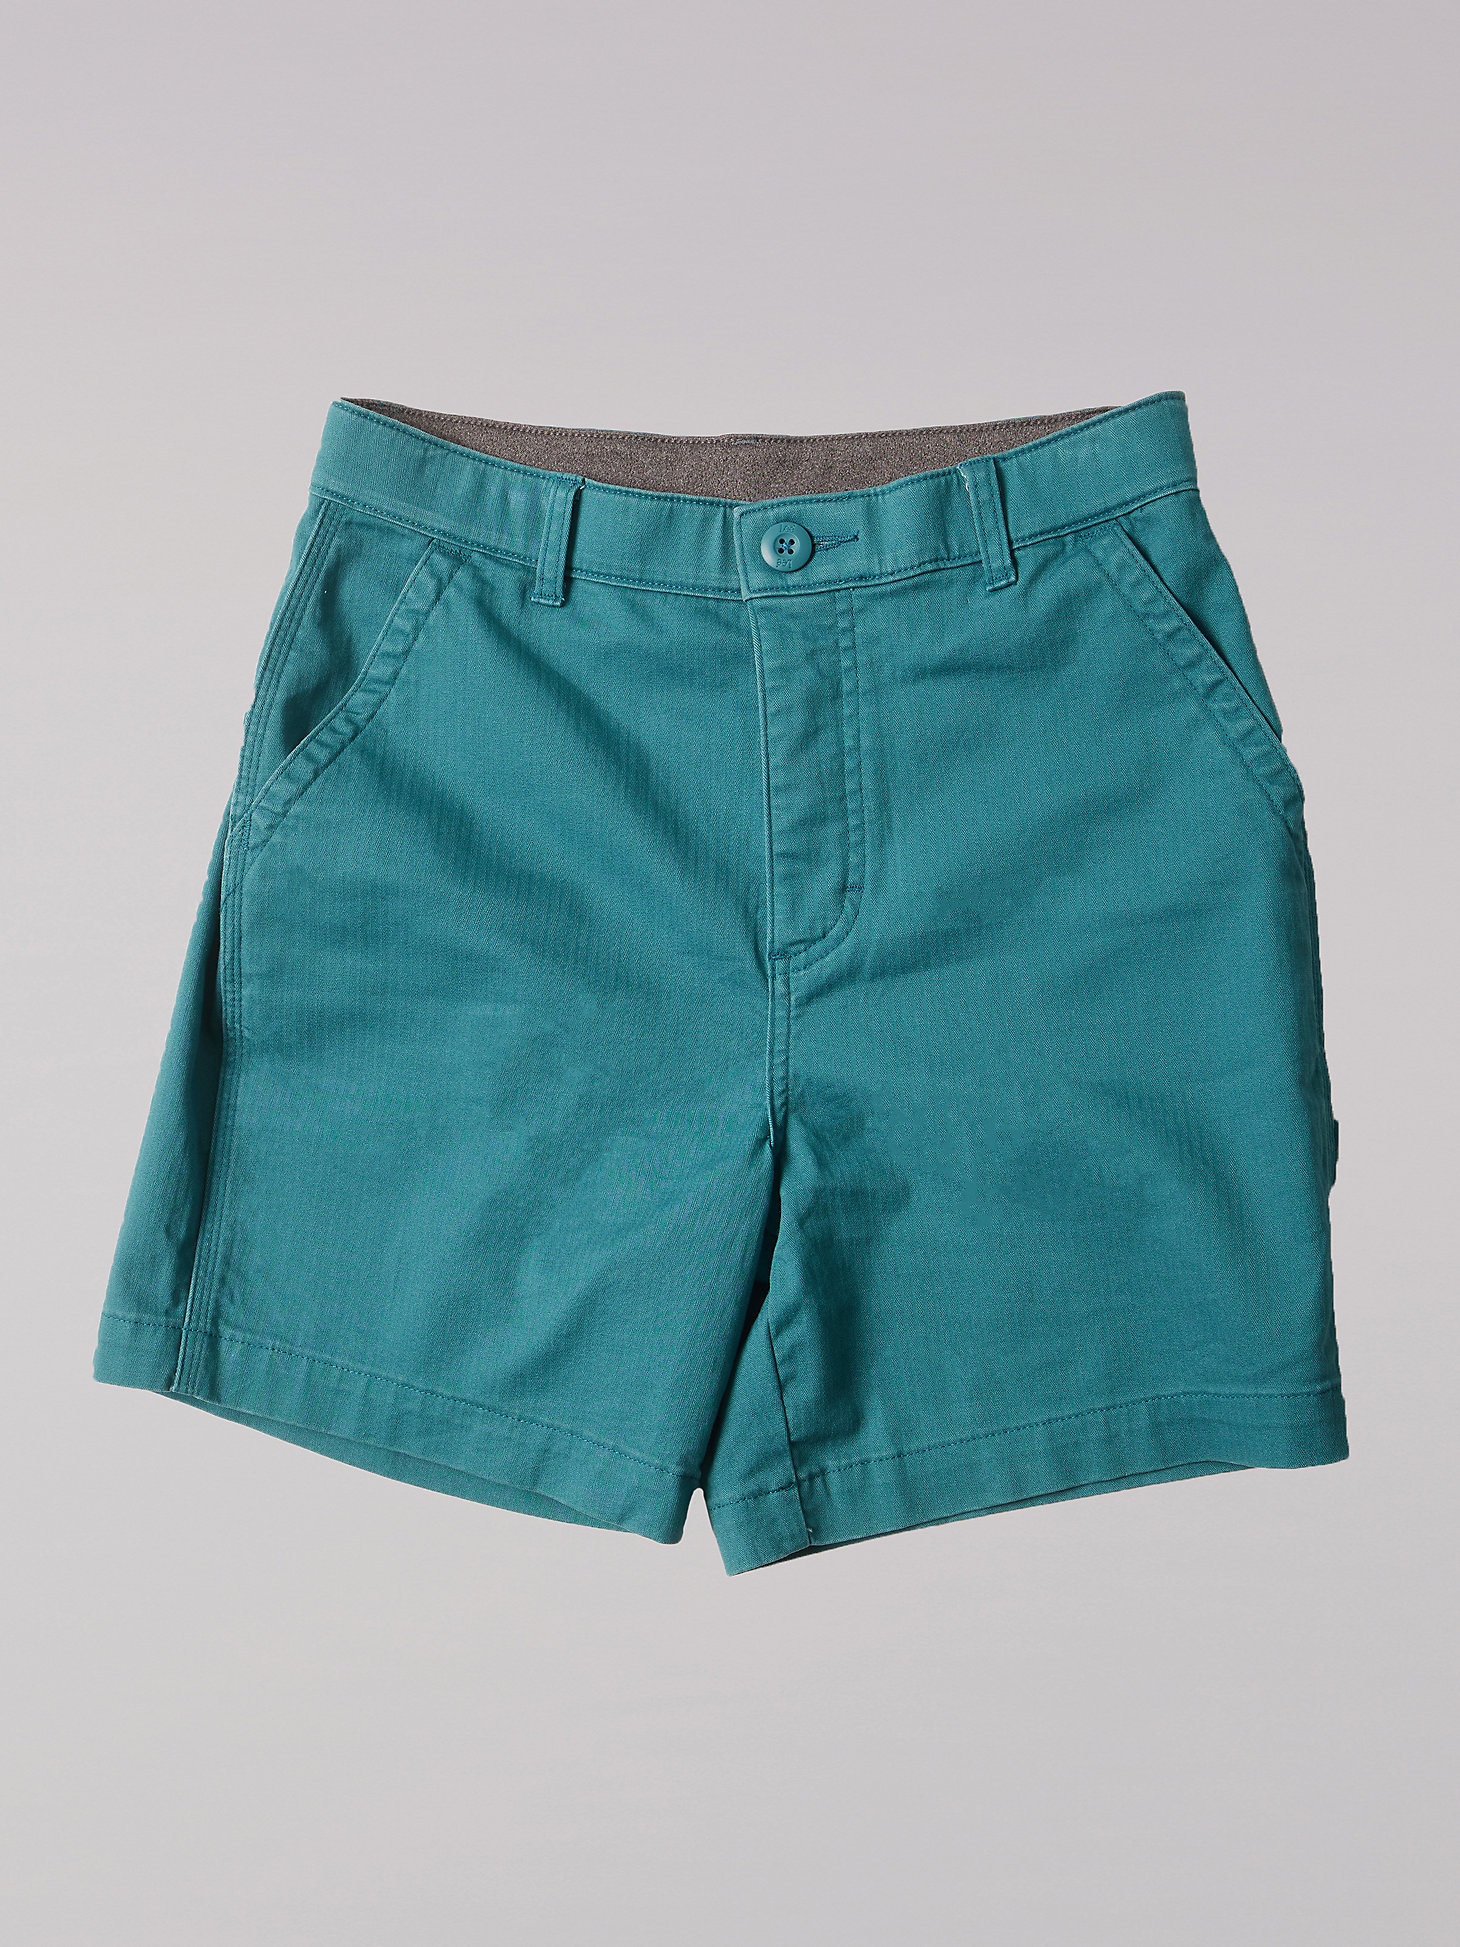 Women's Ultra Lux High Rise Carpenter Short in Midway Teal alternative view 5